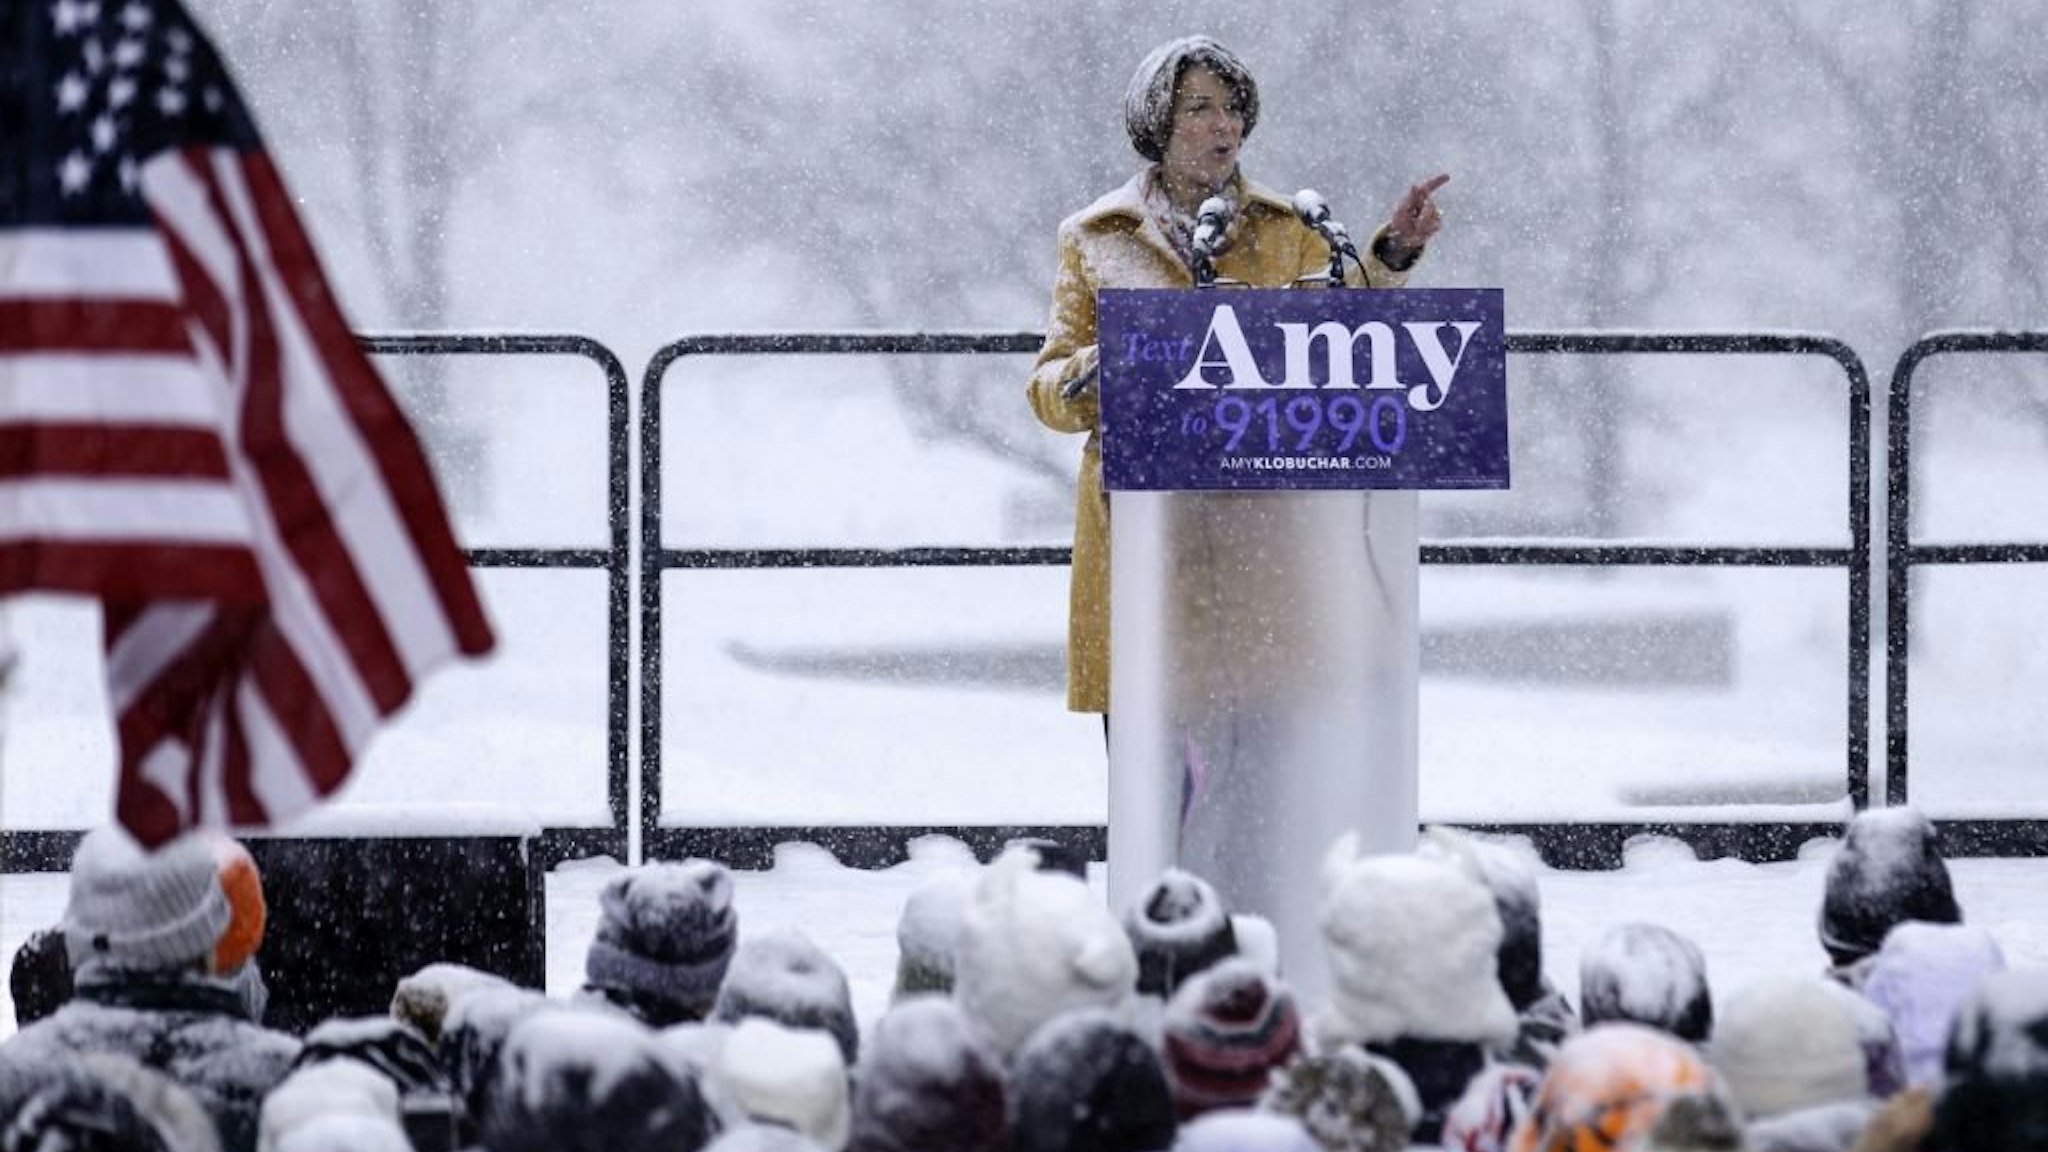 Amy Klobuchar announces her candidacy for president in a heavy snow fall on February 10, 2019